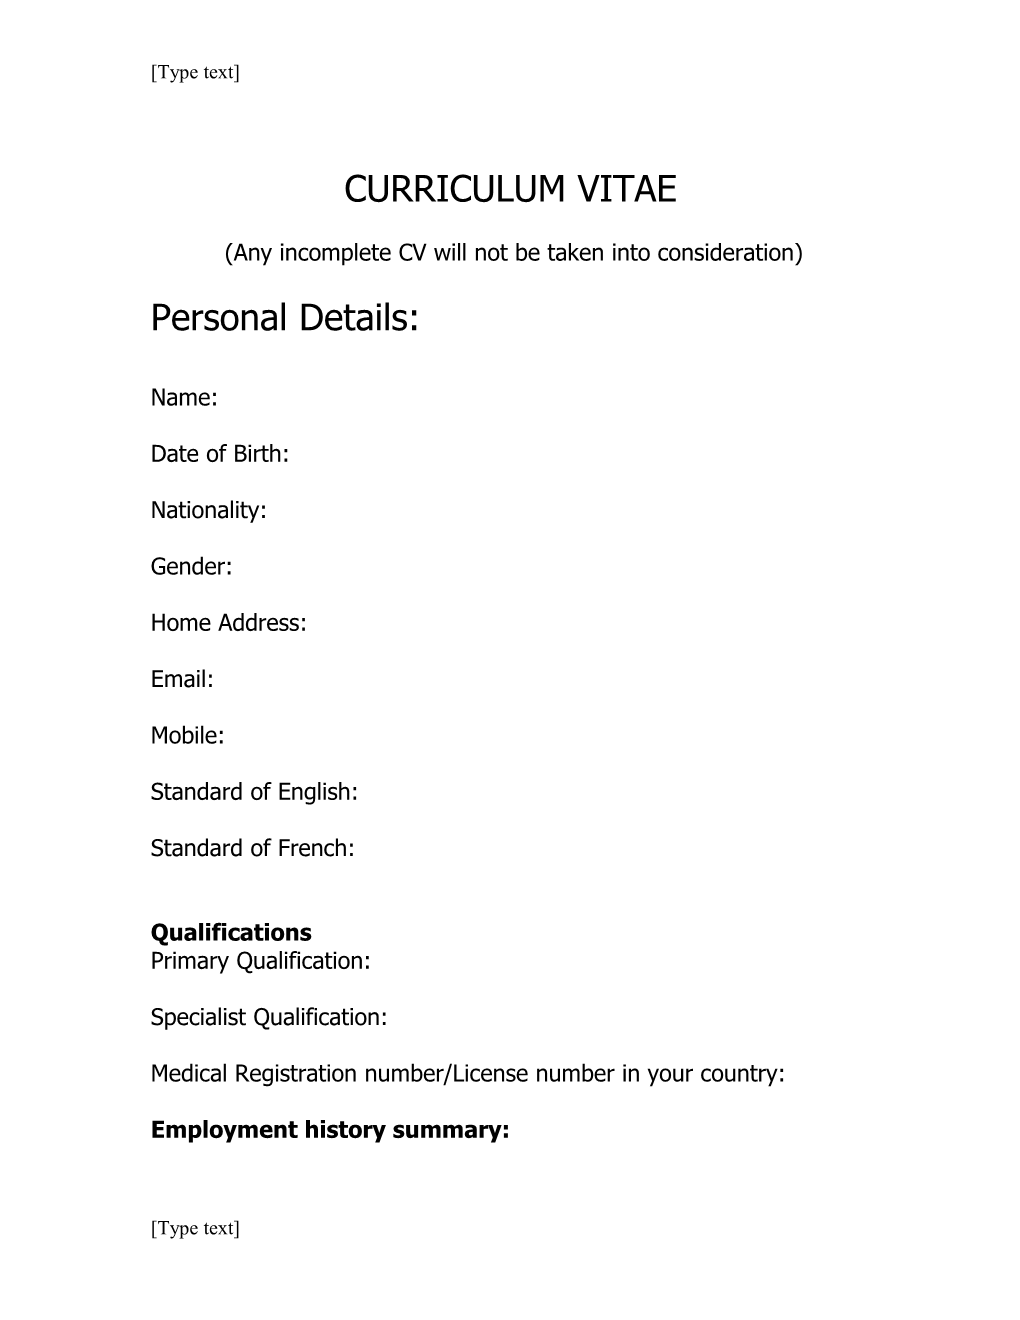 Any Incomplete CV Will Not Be Taken Into Consideration